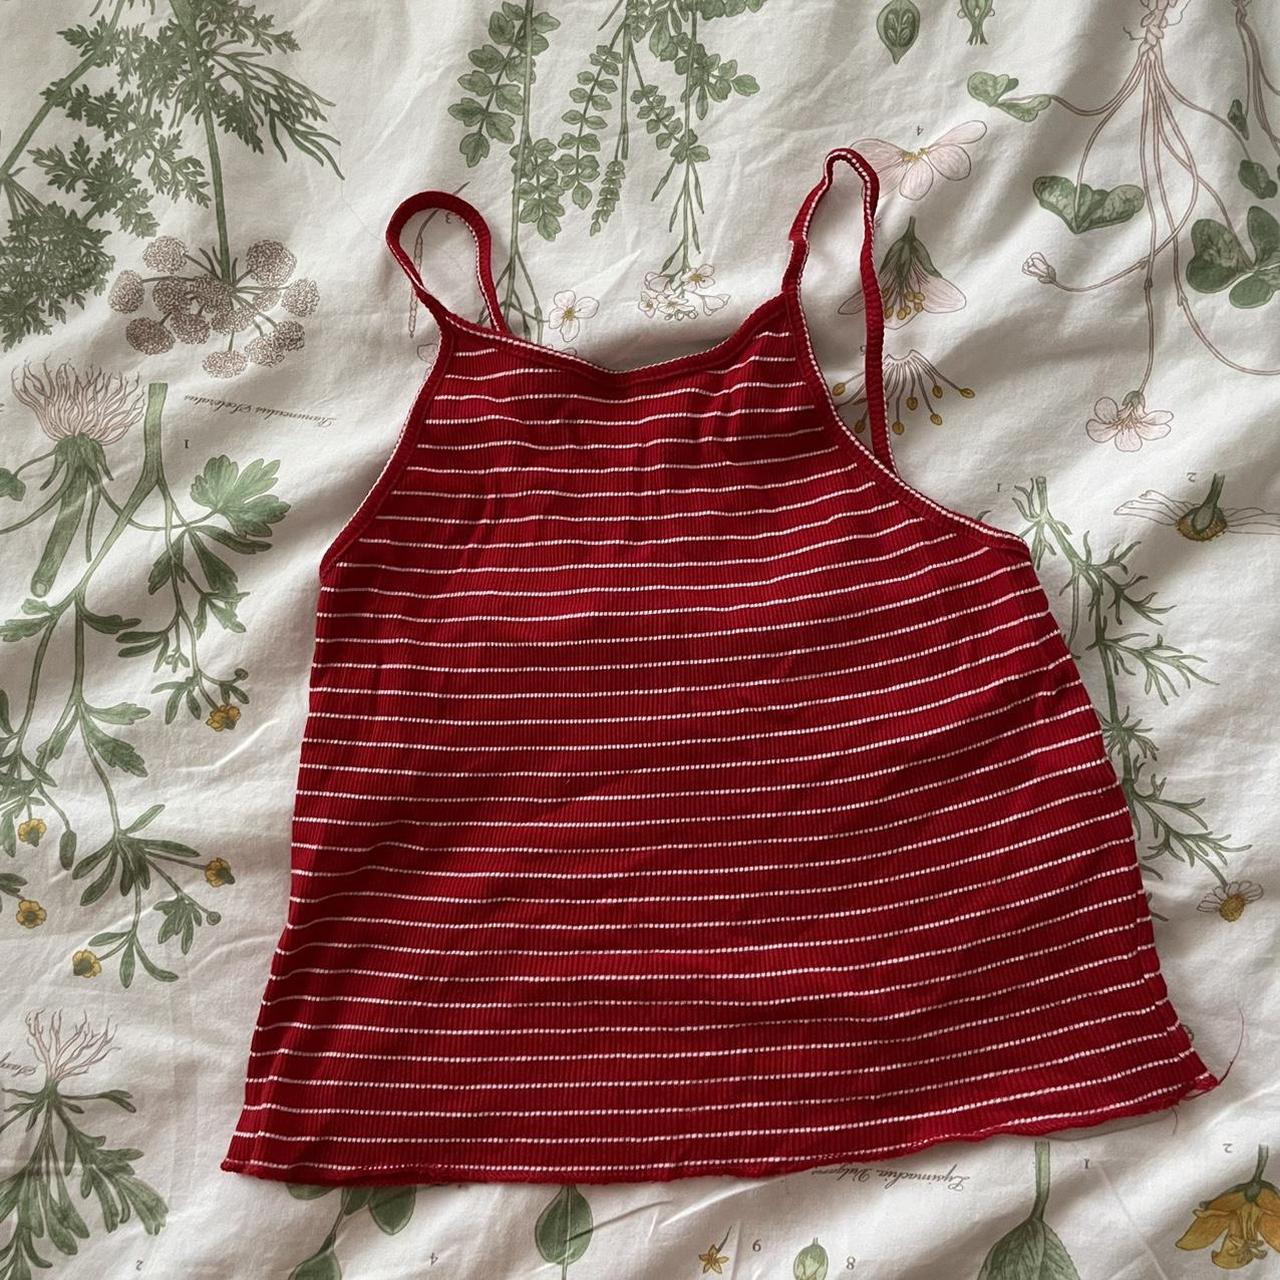 Brandy Melville Red and white striped tank top / - Depop